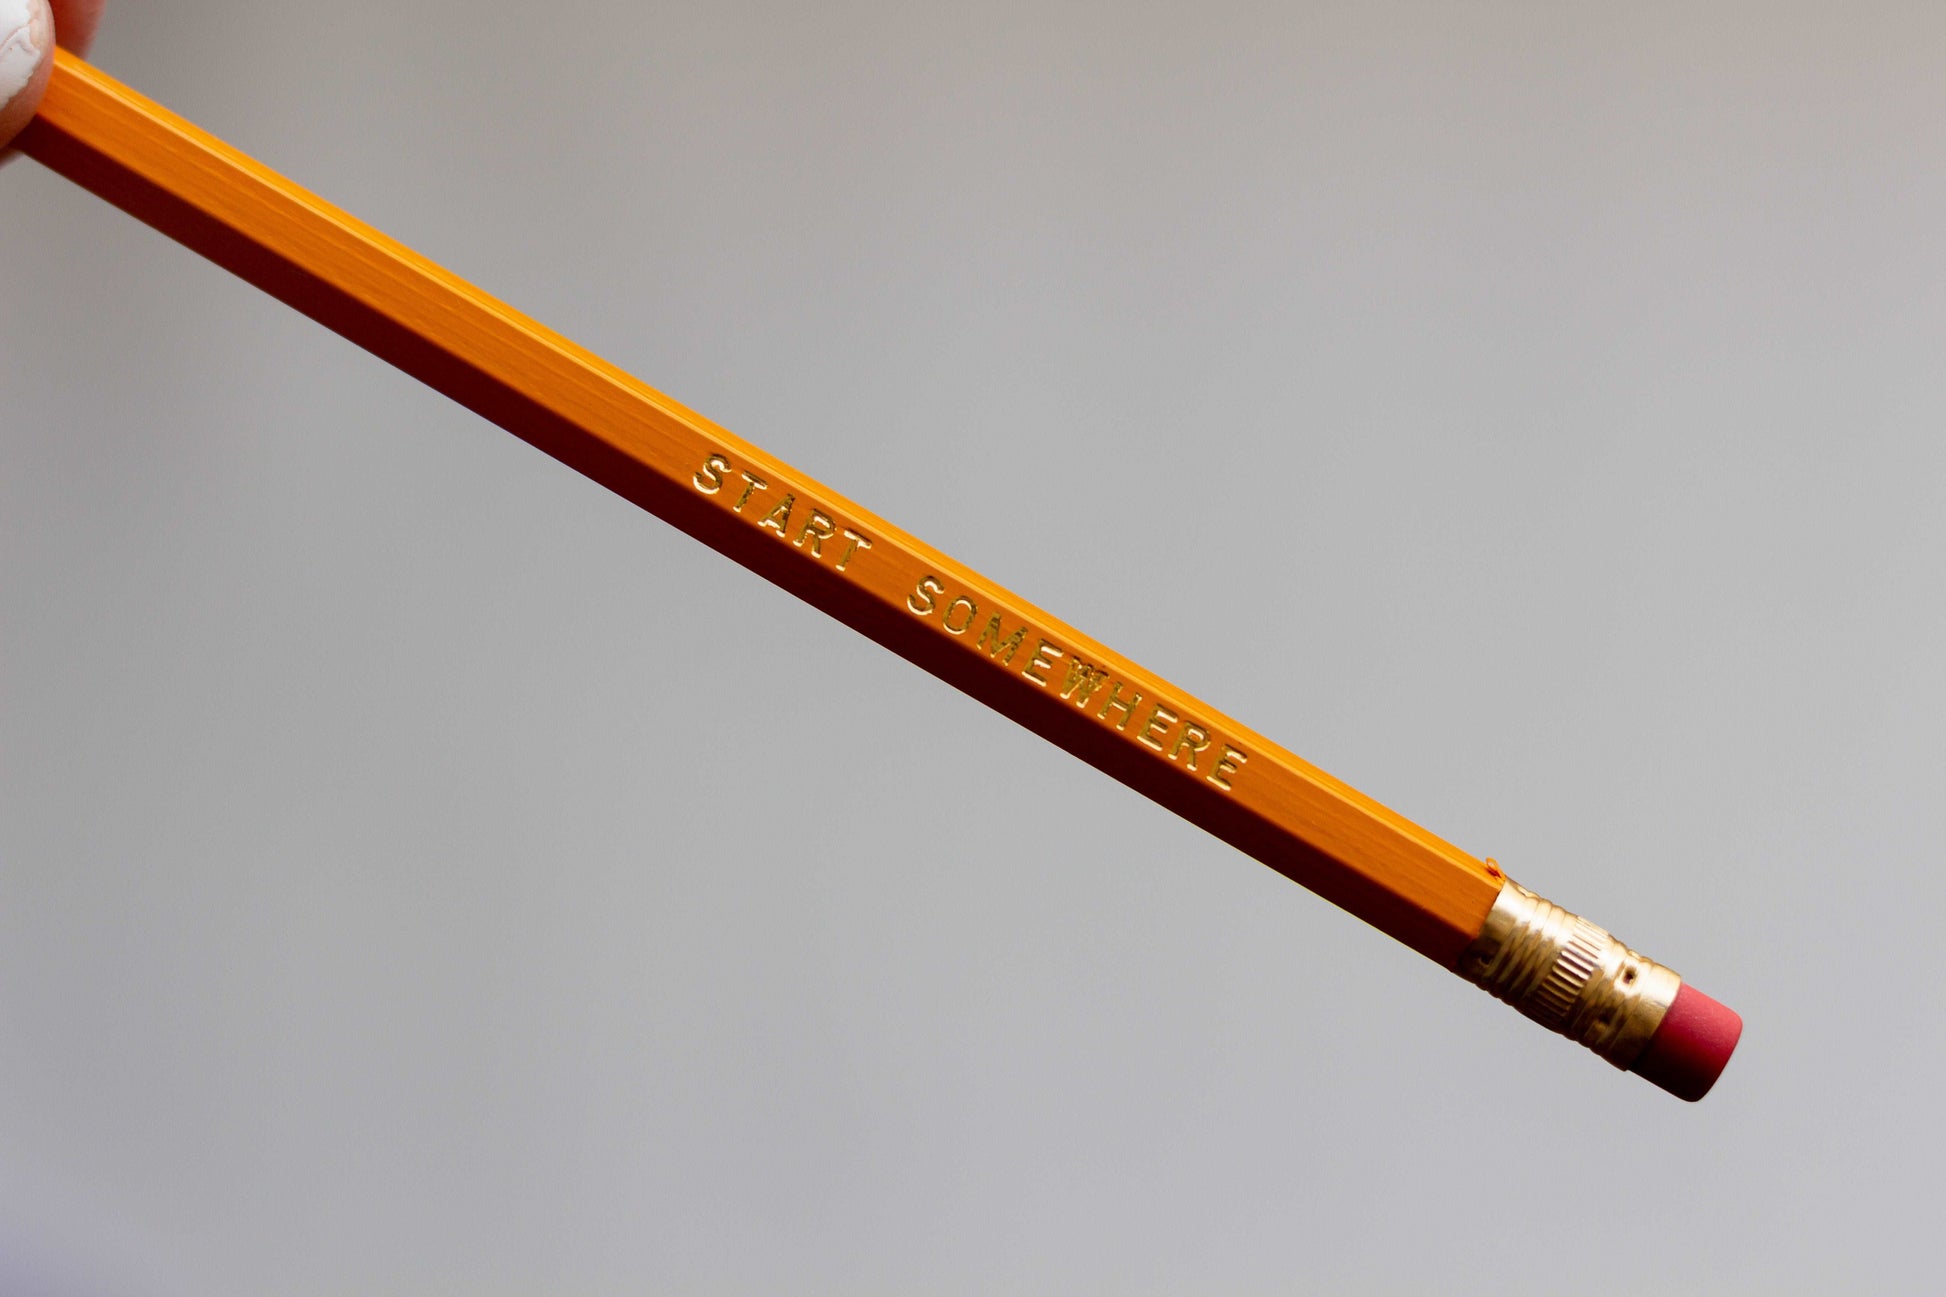 A closeup image of the yellow #2 lead free pencil with pink eraser that has foiled engraved imprint that says start somewhere